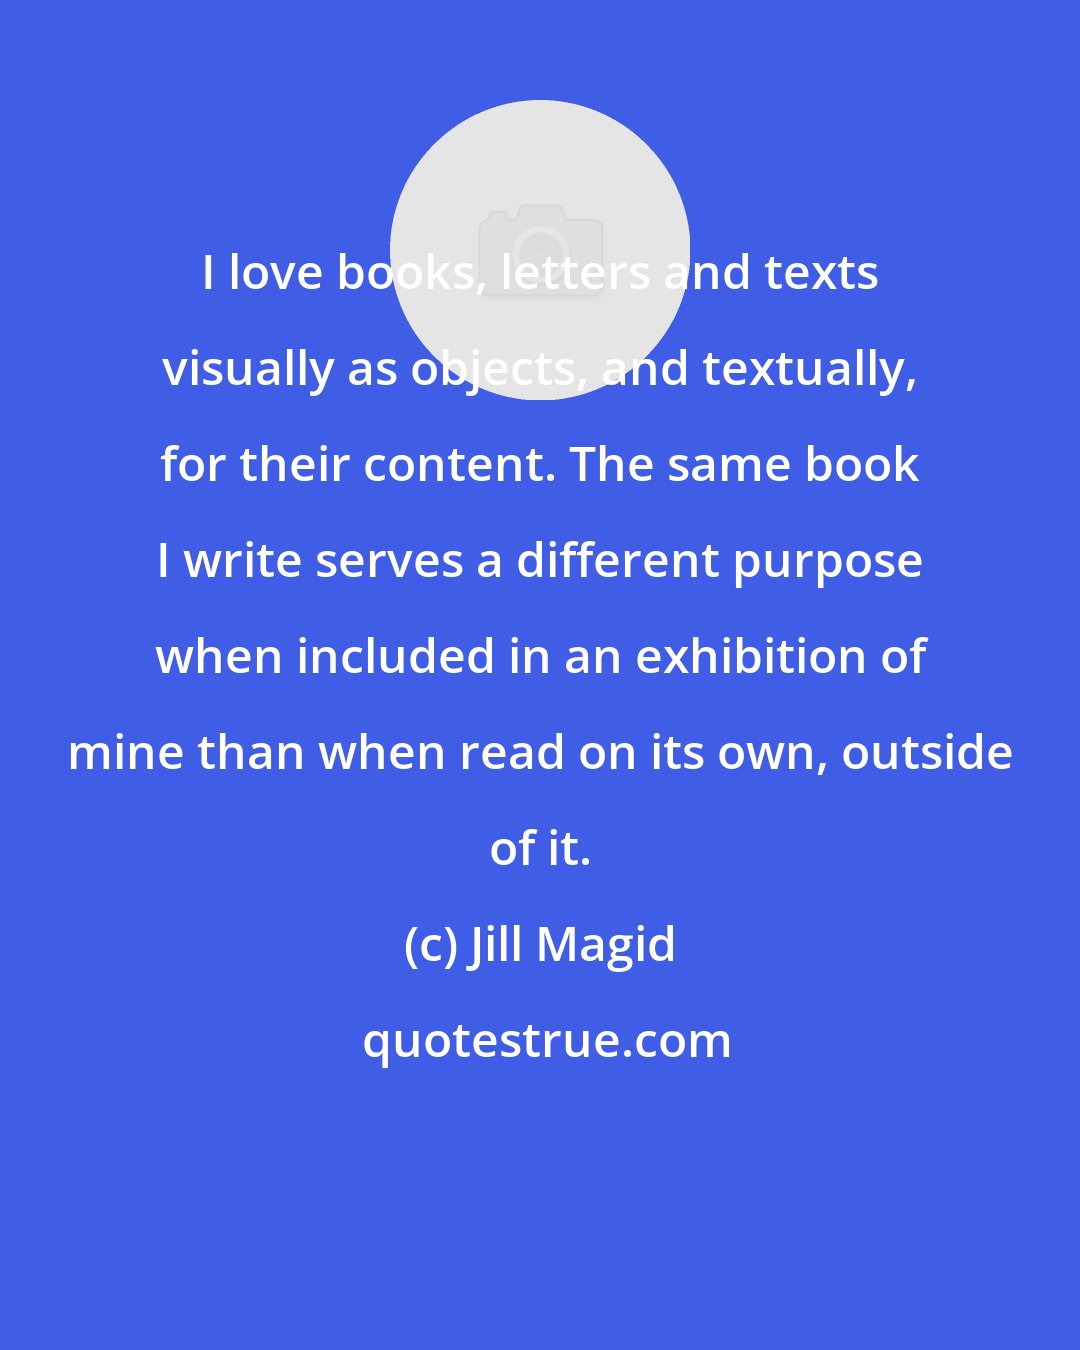 Jill Magid: I love books, letters and texts visually as objects, and textually, for their content. The same book I write serves a different purpose when included in an exhibition of mine than when read on its own, outside of it.